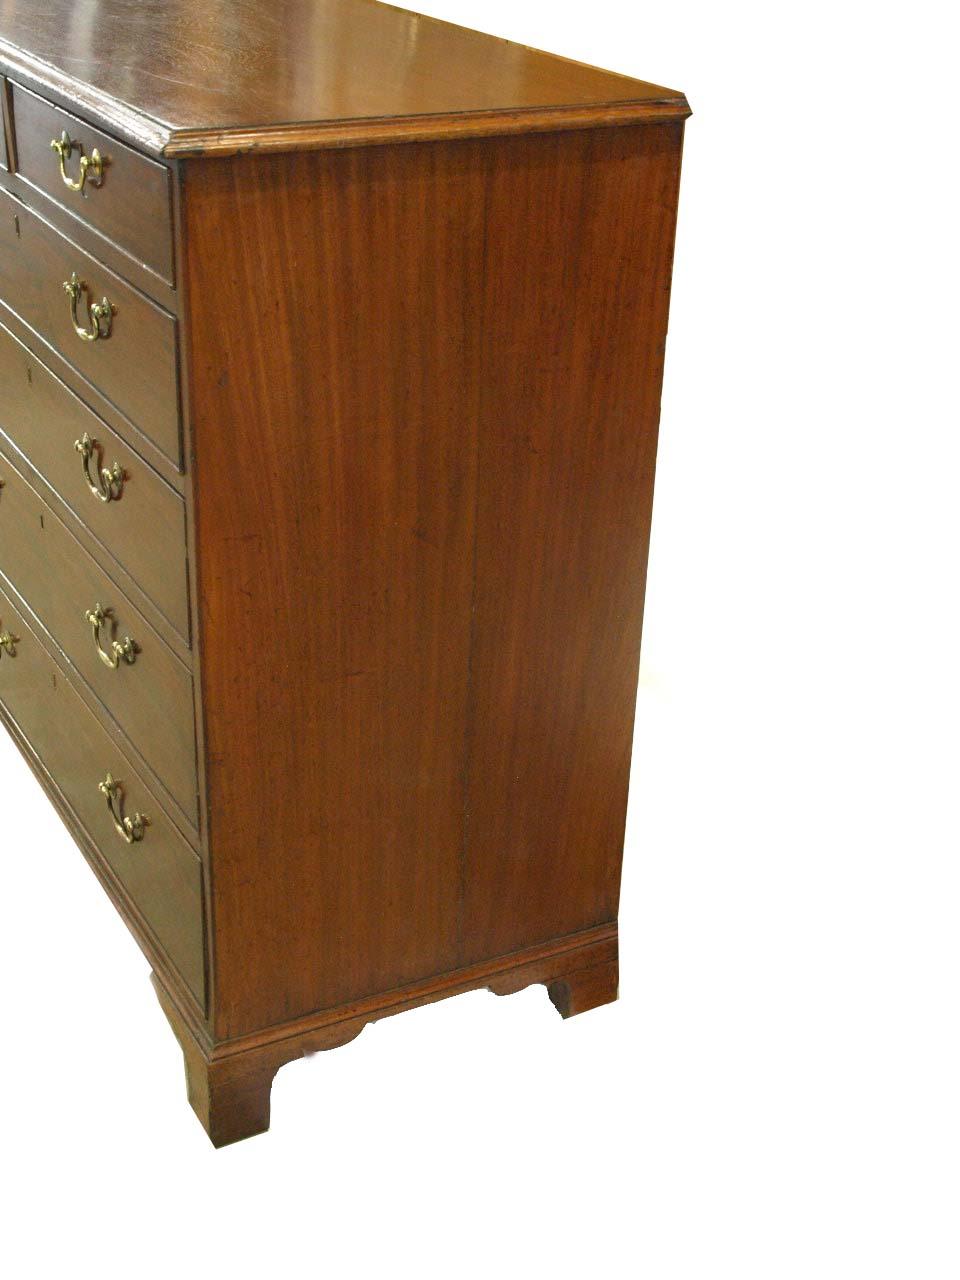 English Chippendale Tall Chest In Good Condition For Sale In Wilson, NC